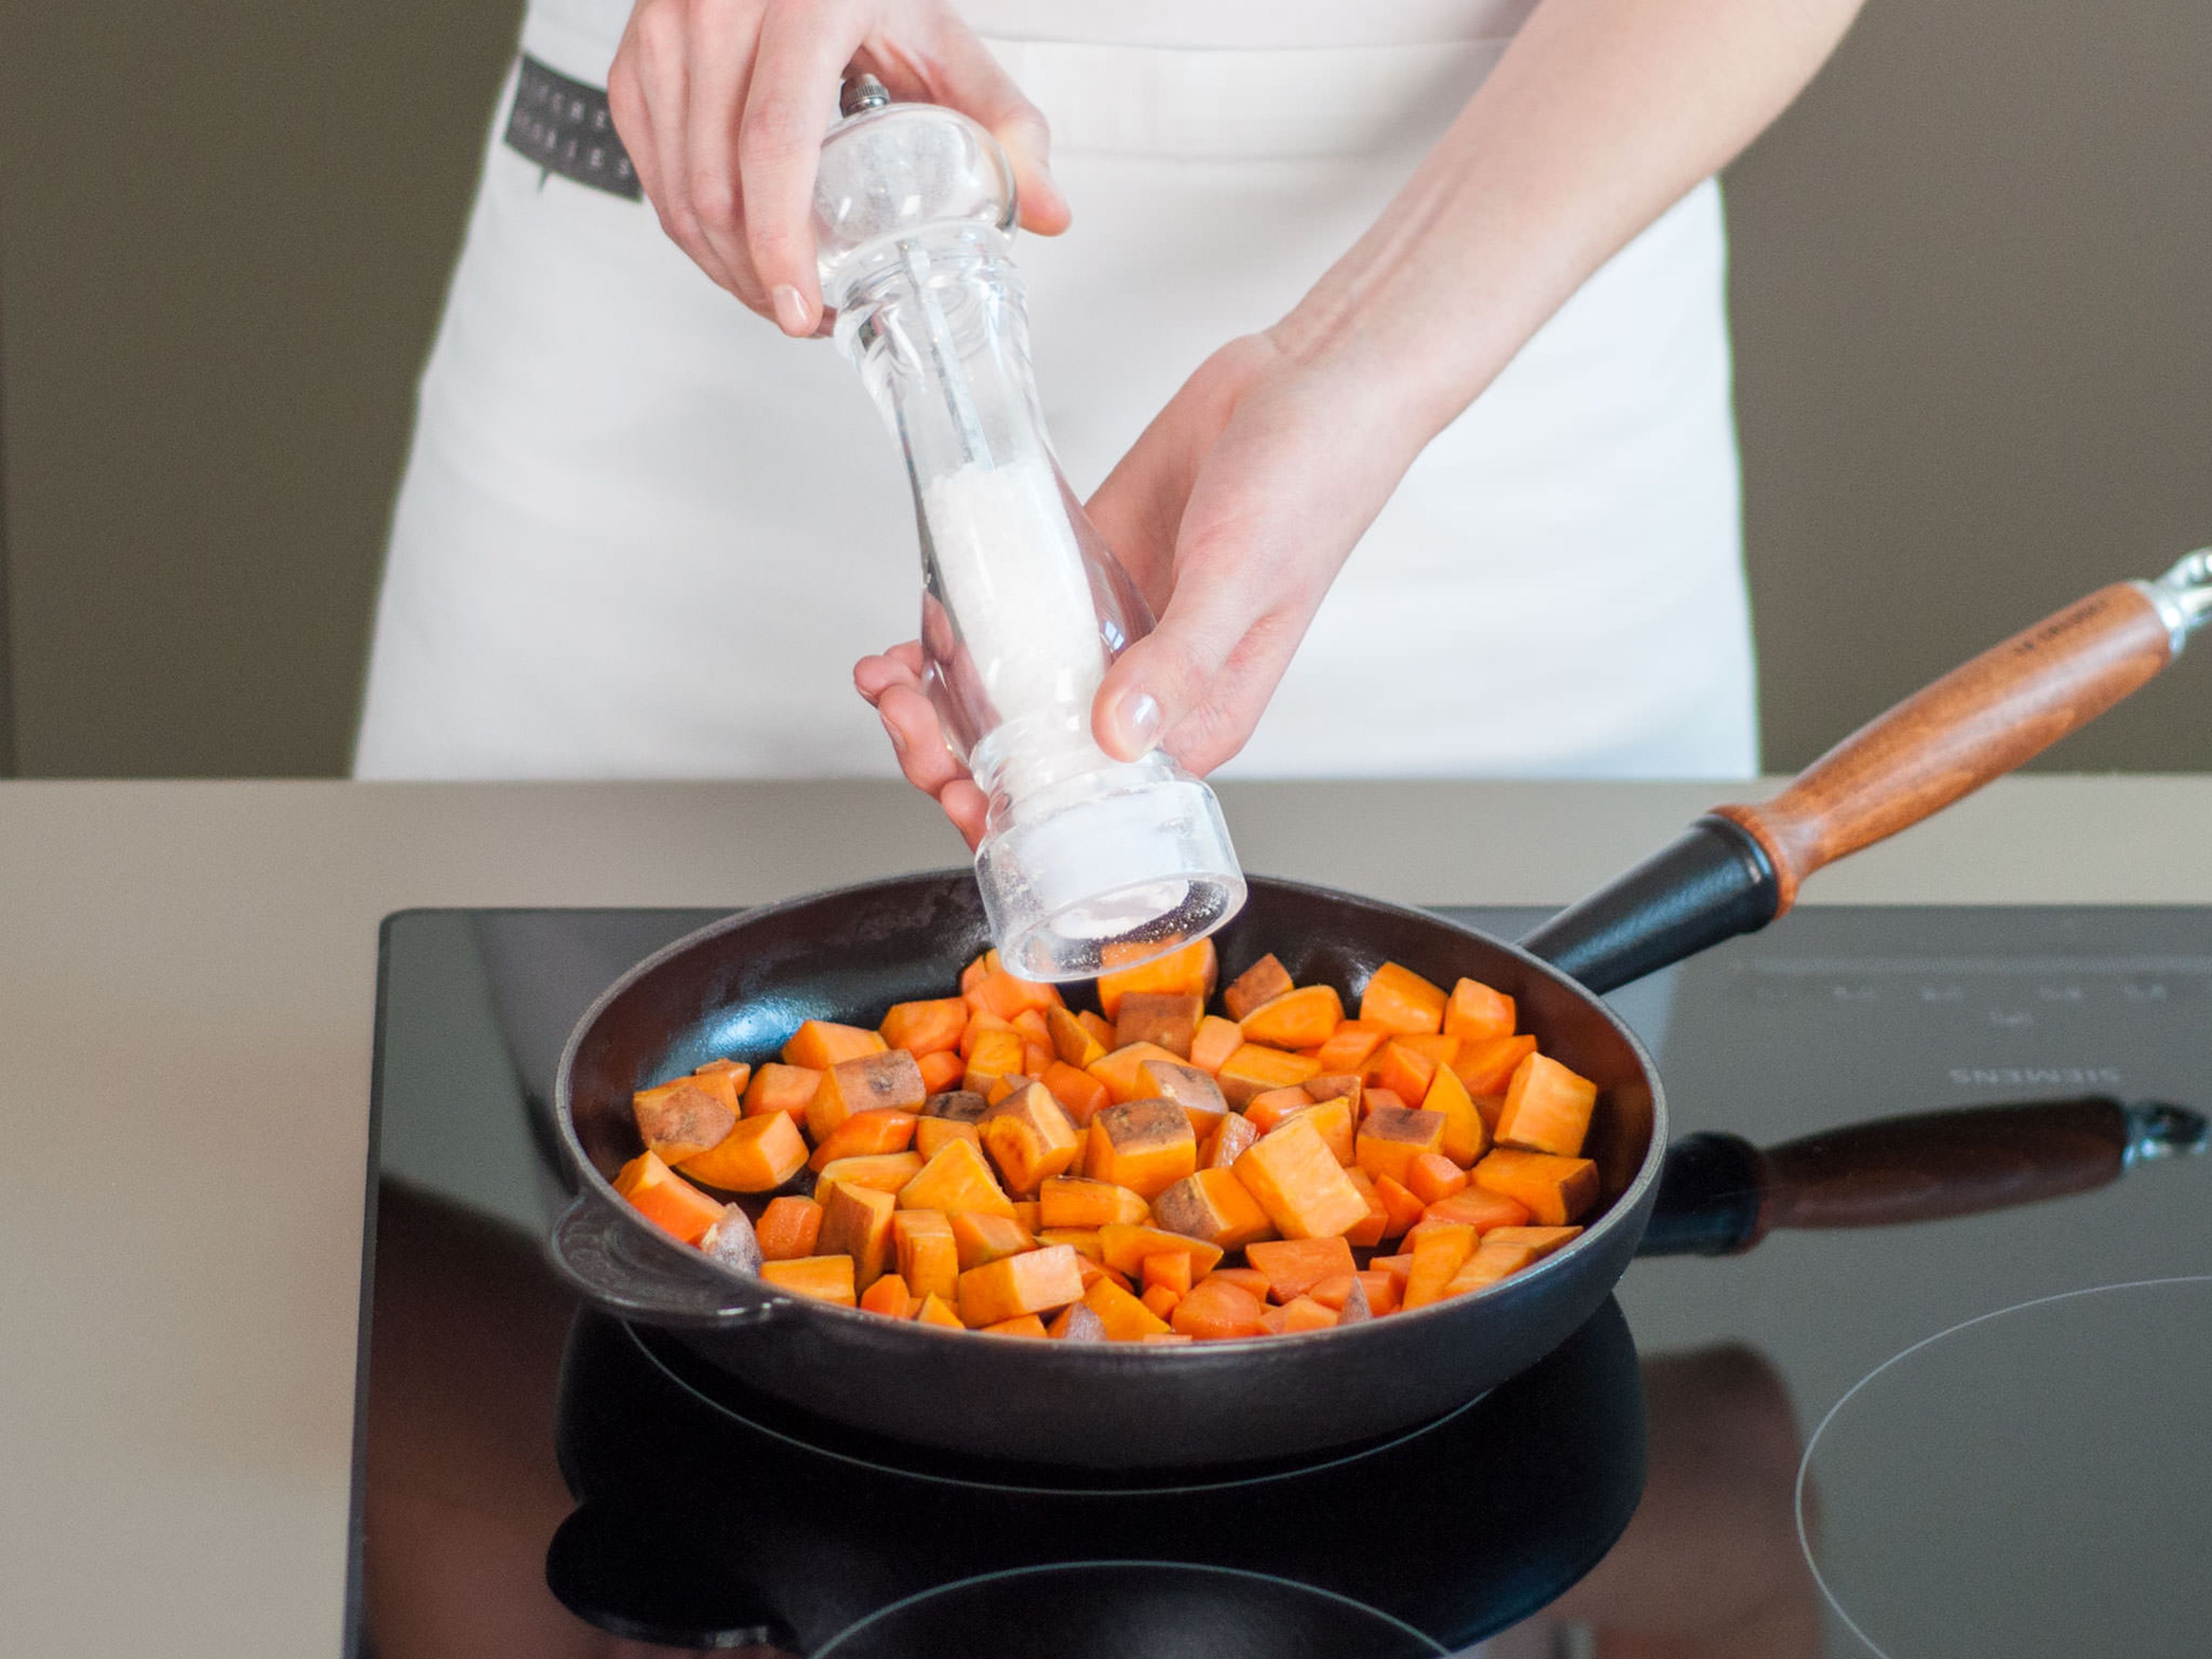 In a large frying pan, sauté sweet potato over medium-high heat for approx. 6 – 10 min. until golden brown and tender. Add carrots and sauté for approx. 3 – 5 min.